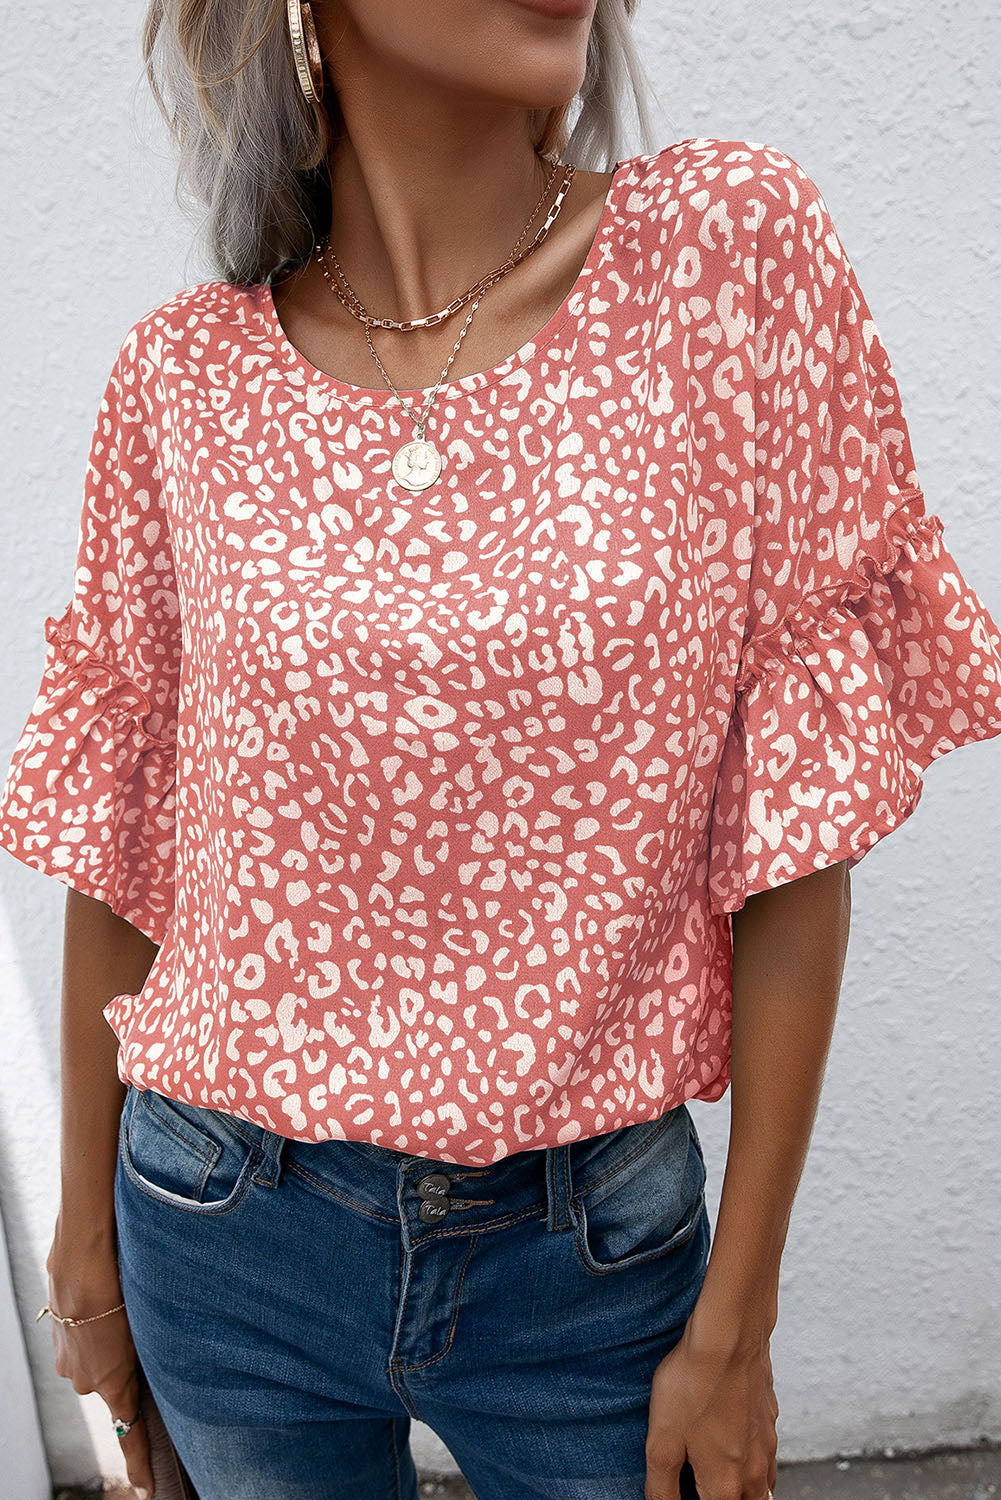 Pink Leopard Print Casual Flounce Sleeve Blouse for Women - Cowtown Bling N Things